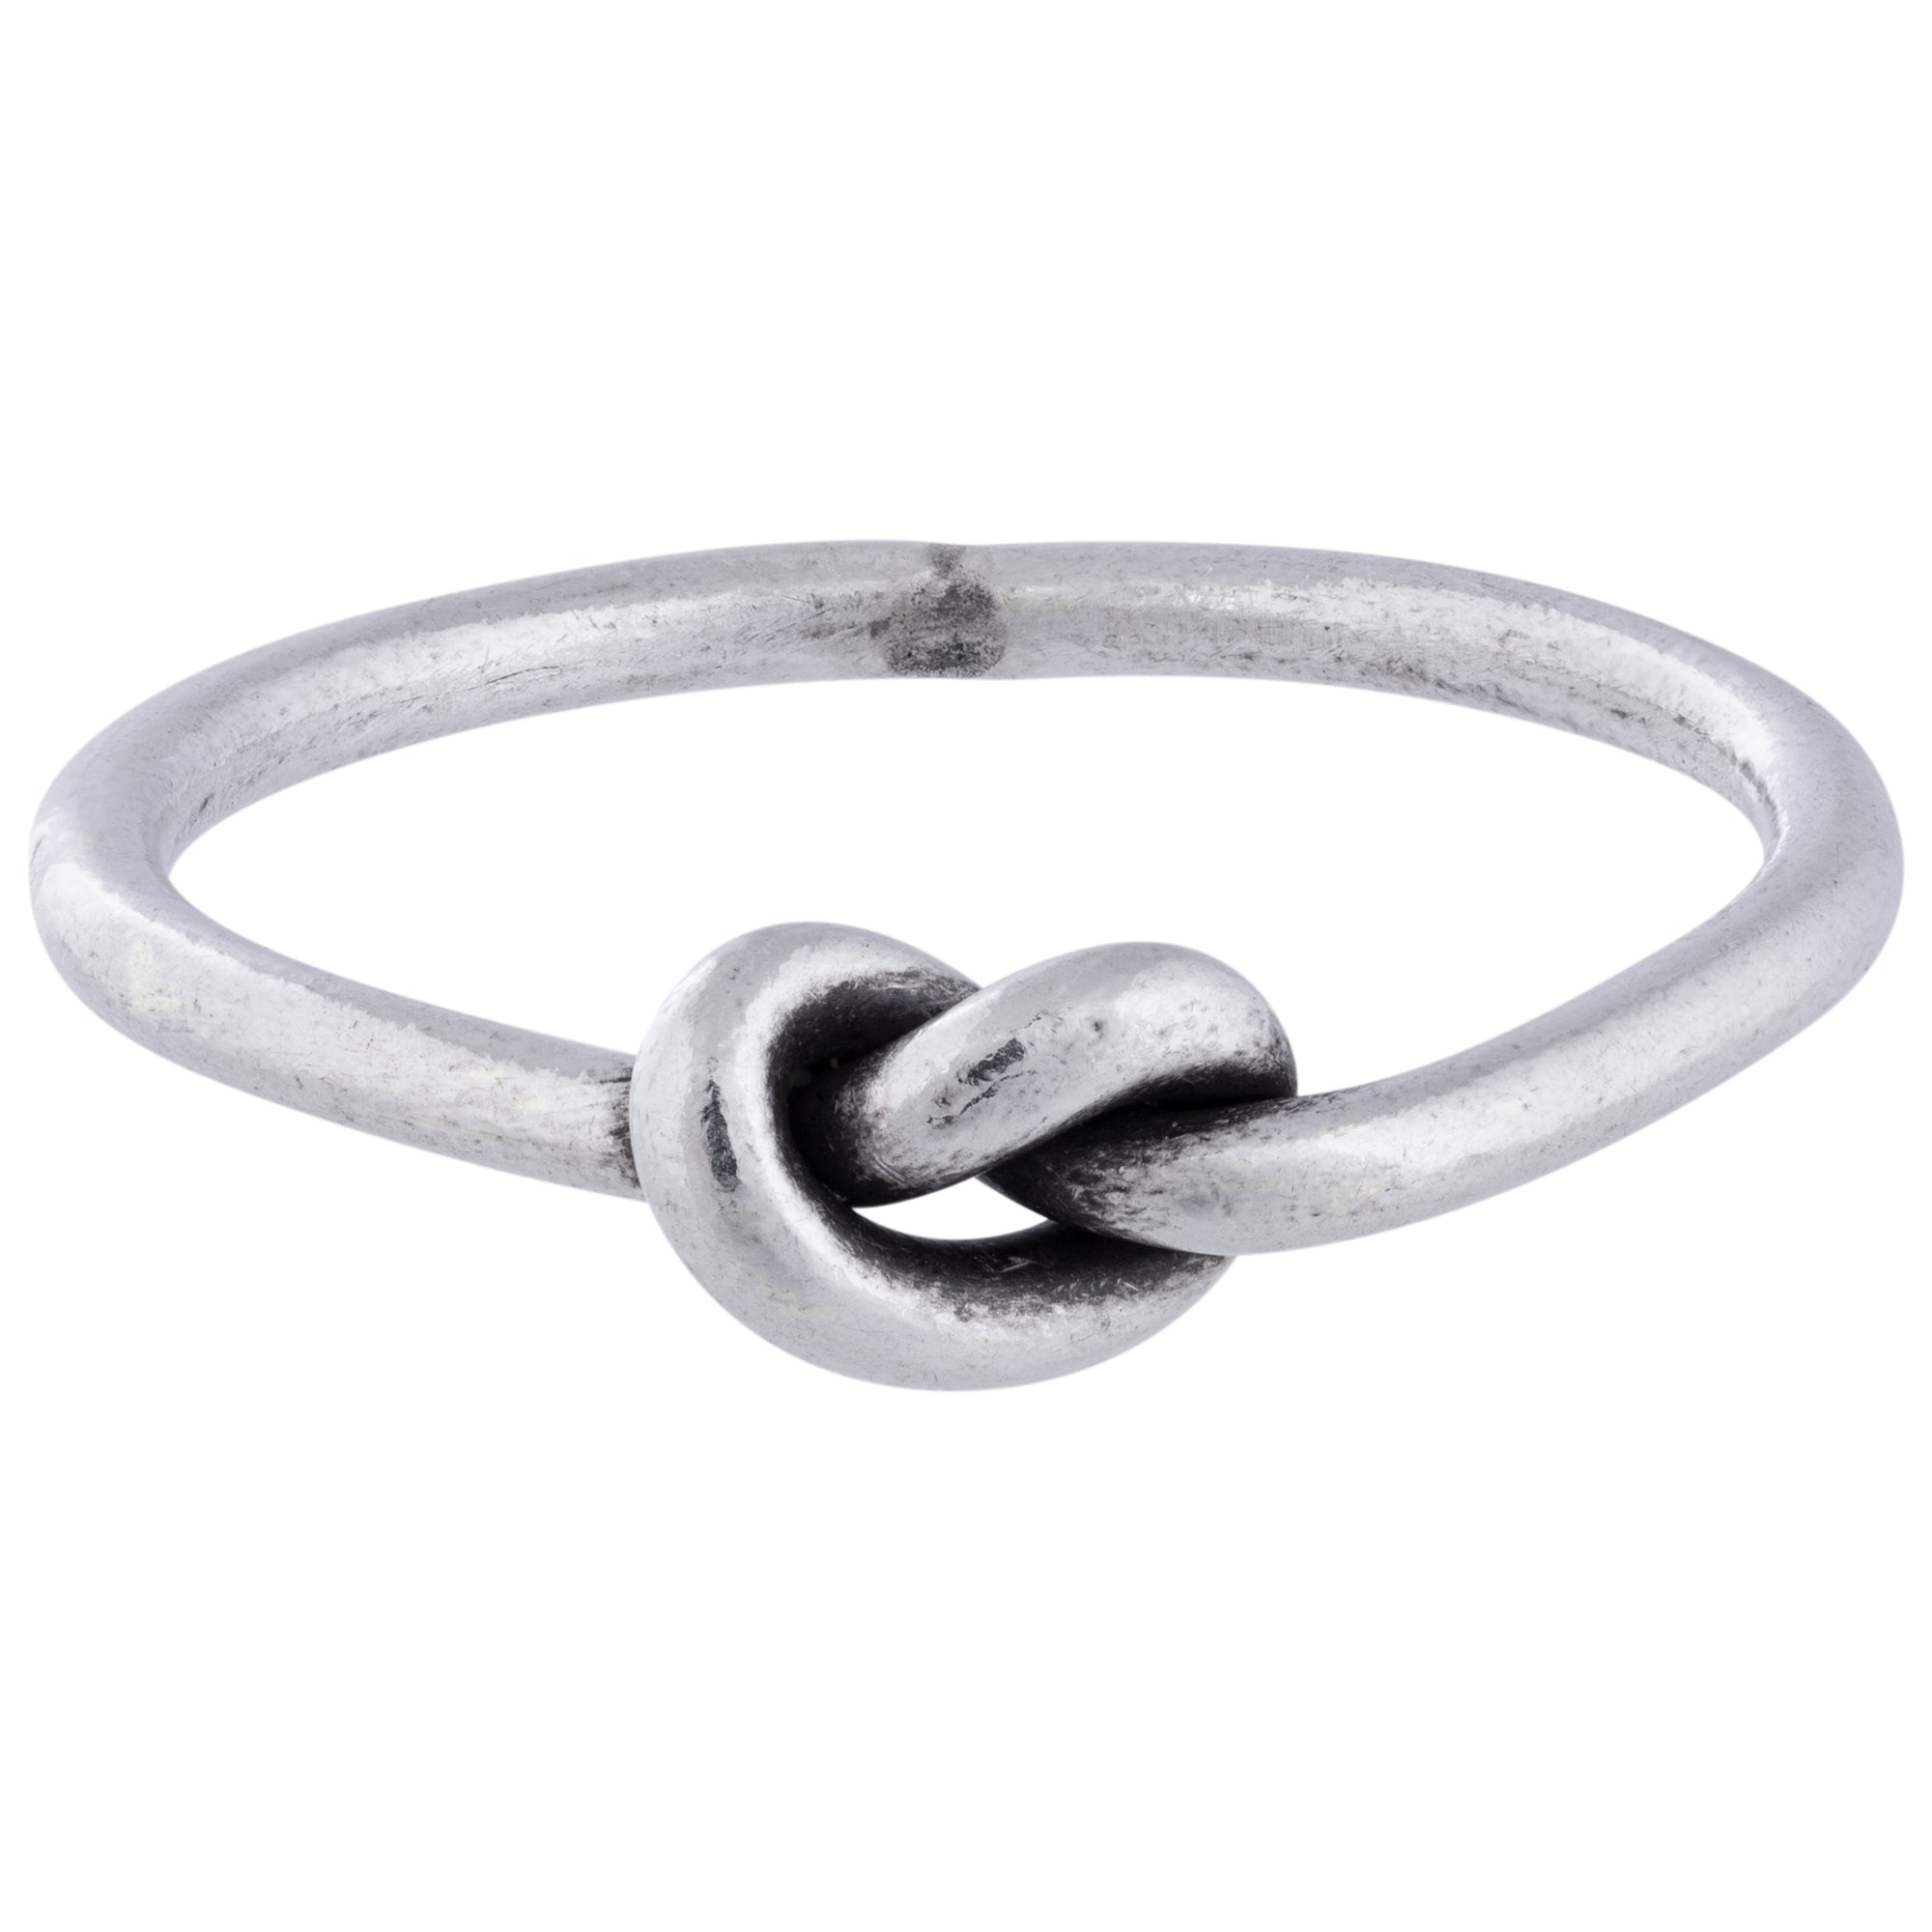 Tiny Knot Sterling Silver Ring - Size 6